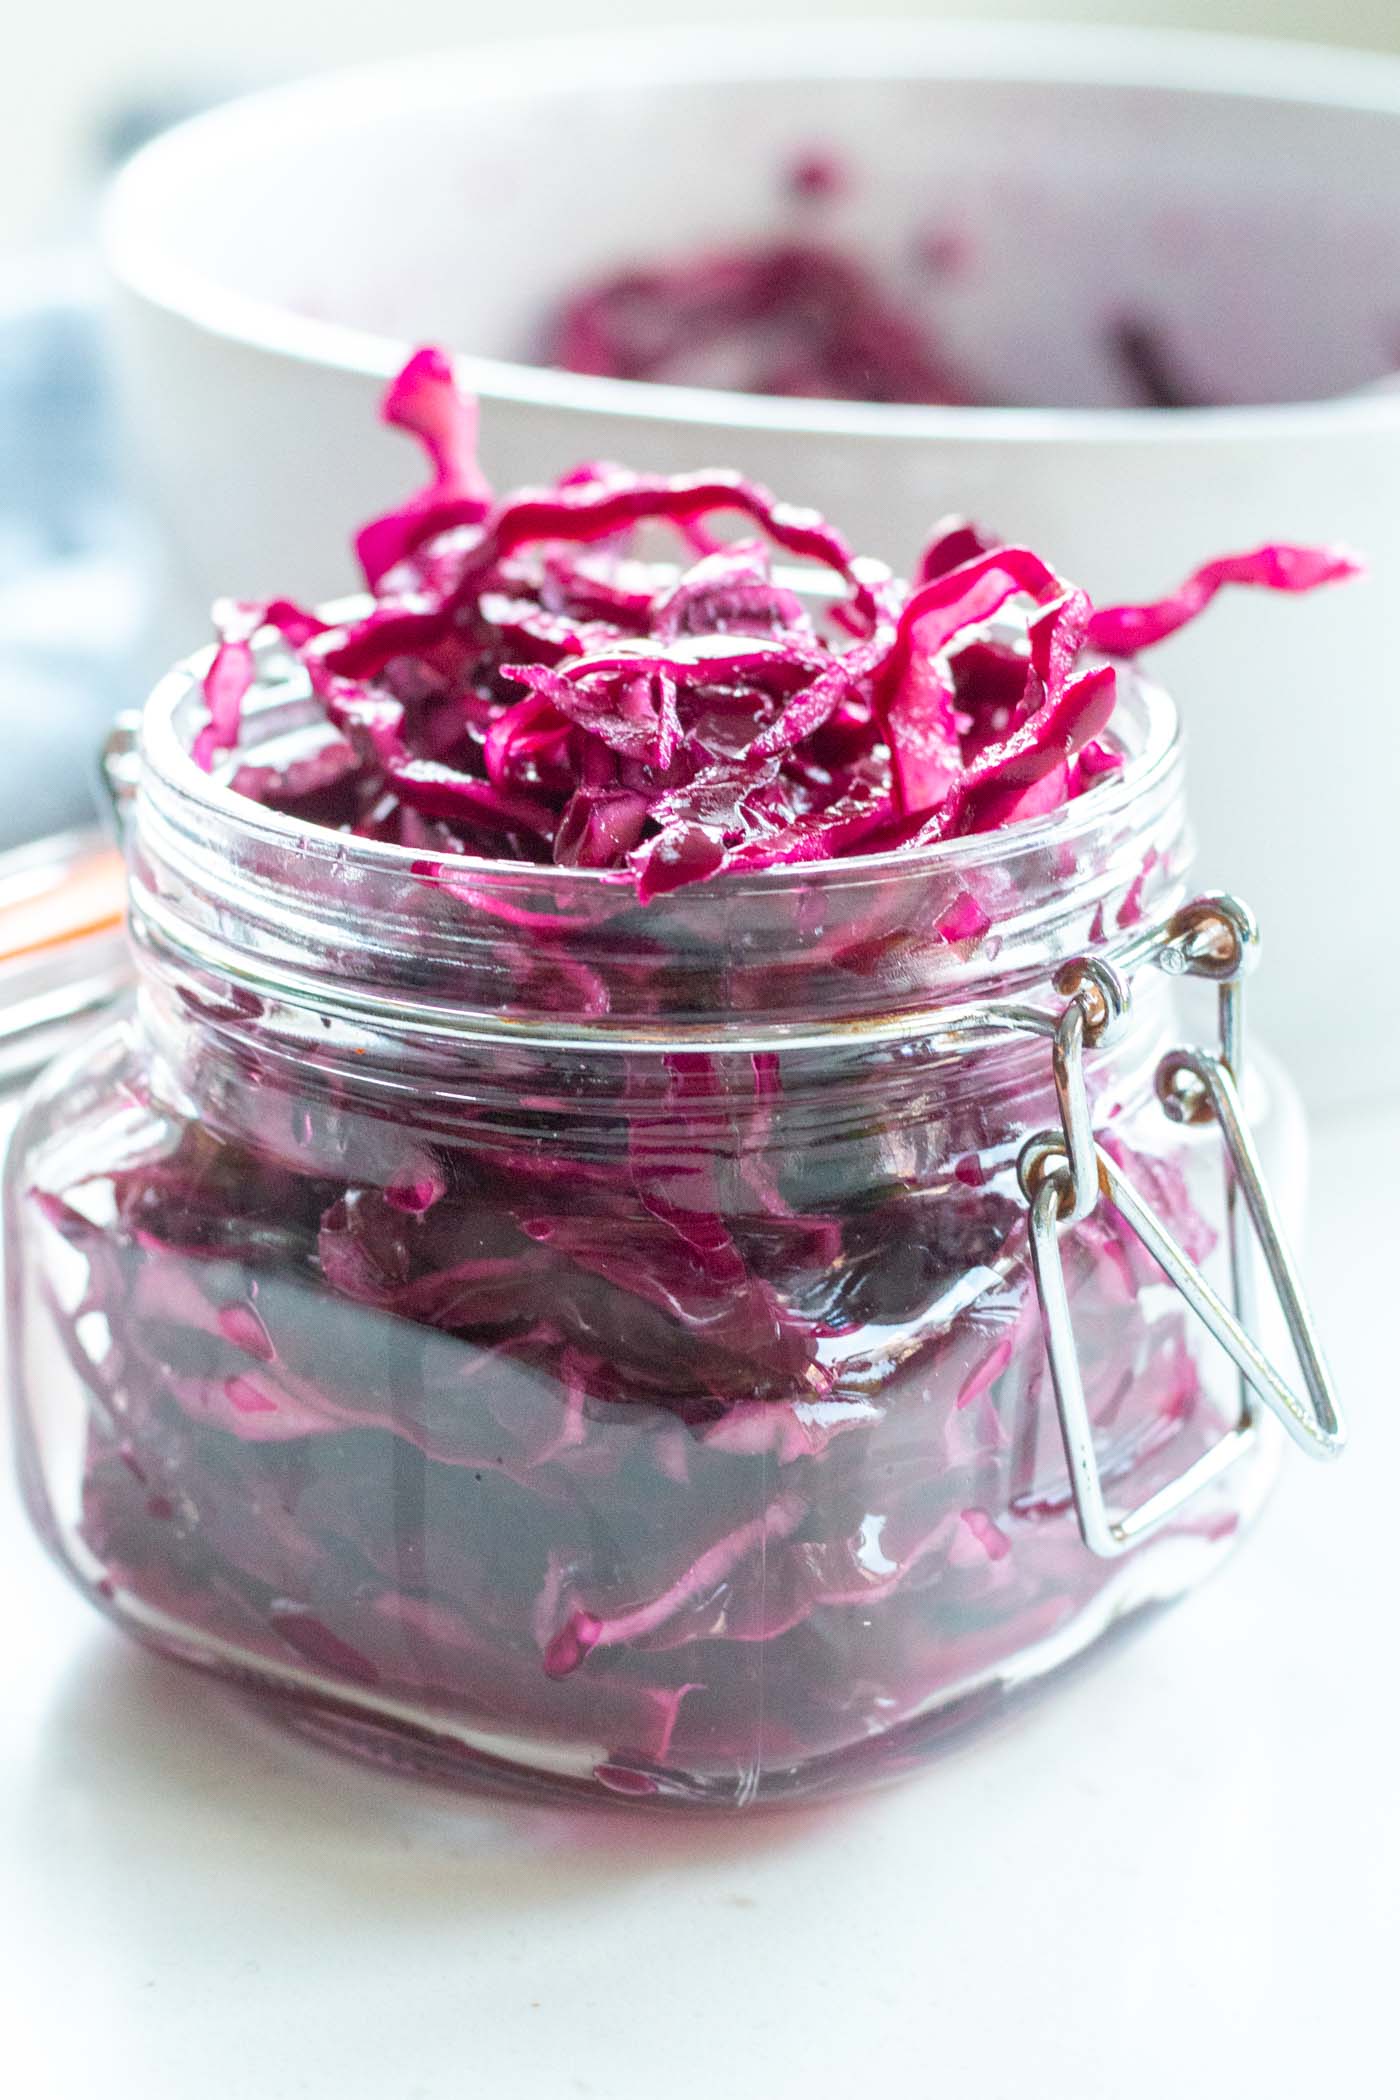 Quick Pickled Red Cabbage – Add A Tangy Twist to your meals